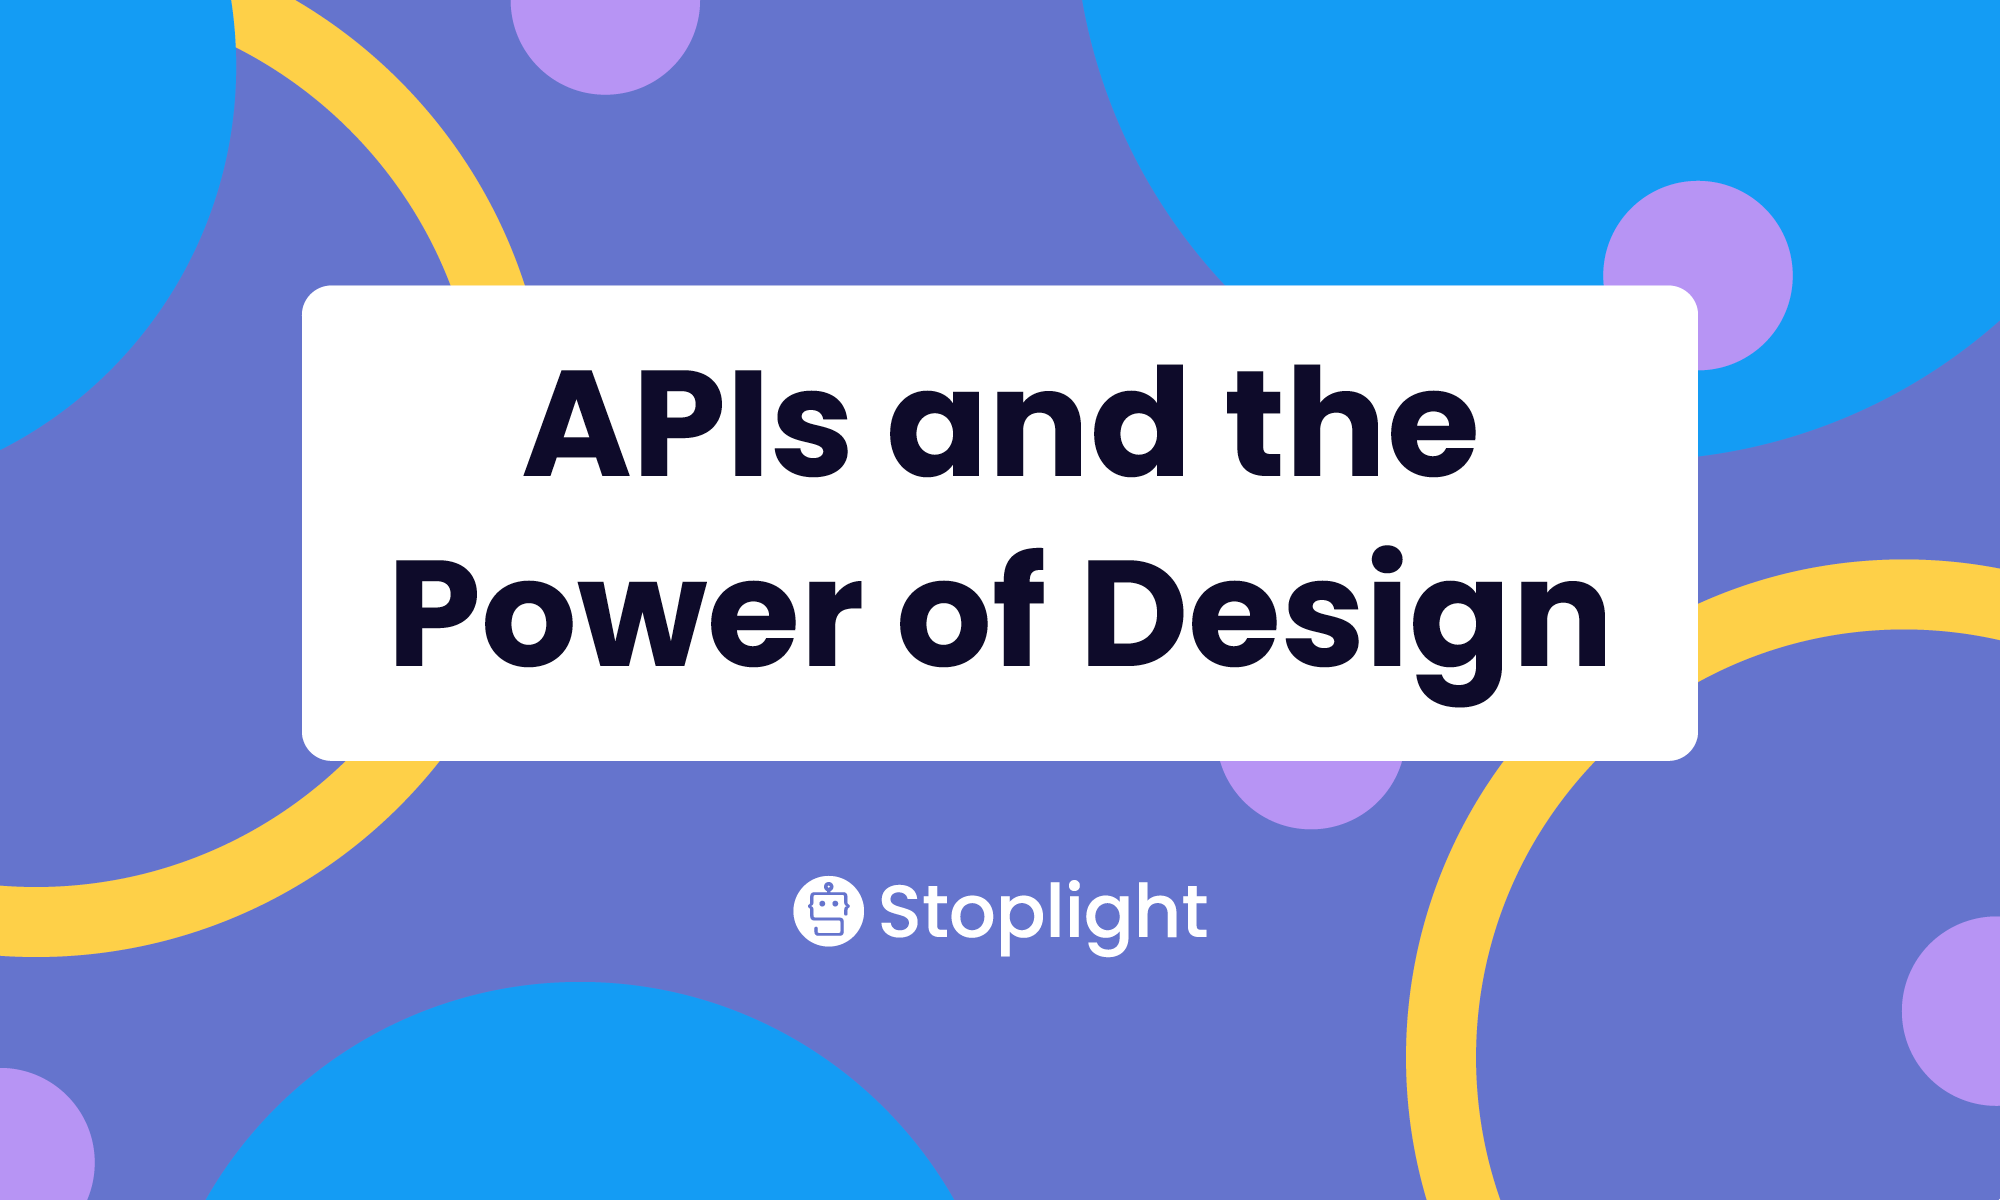 APIs and the Power of Design